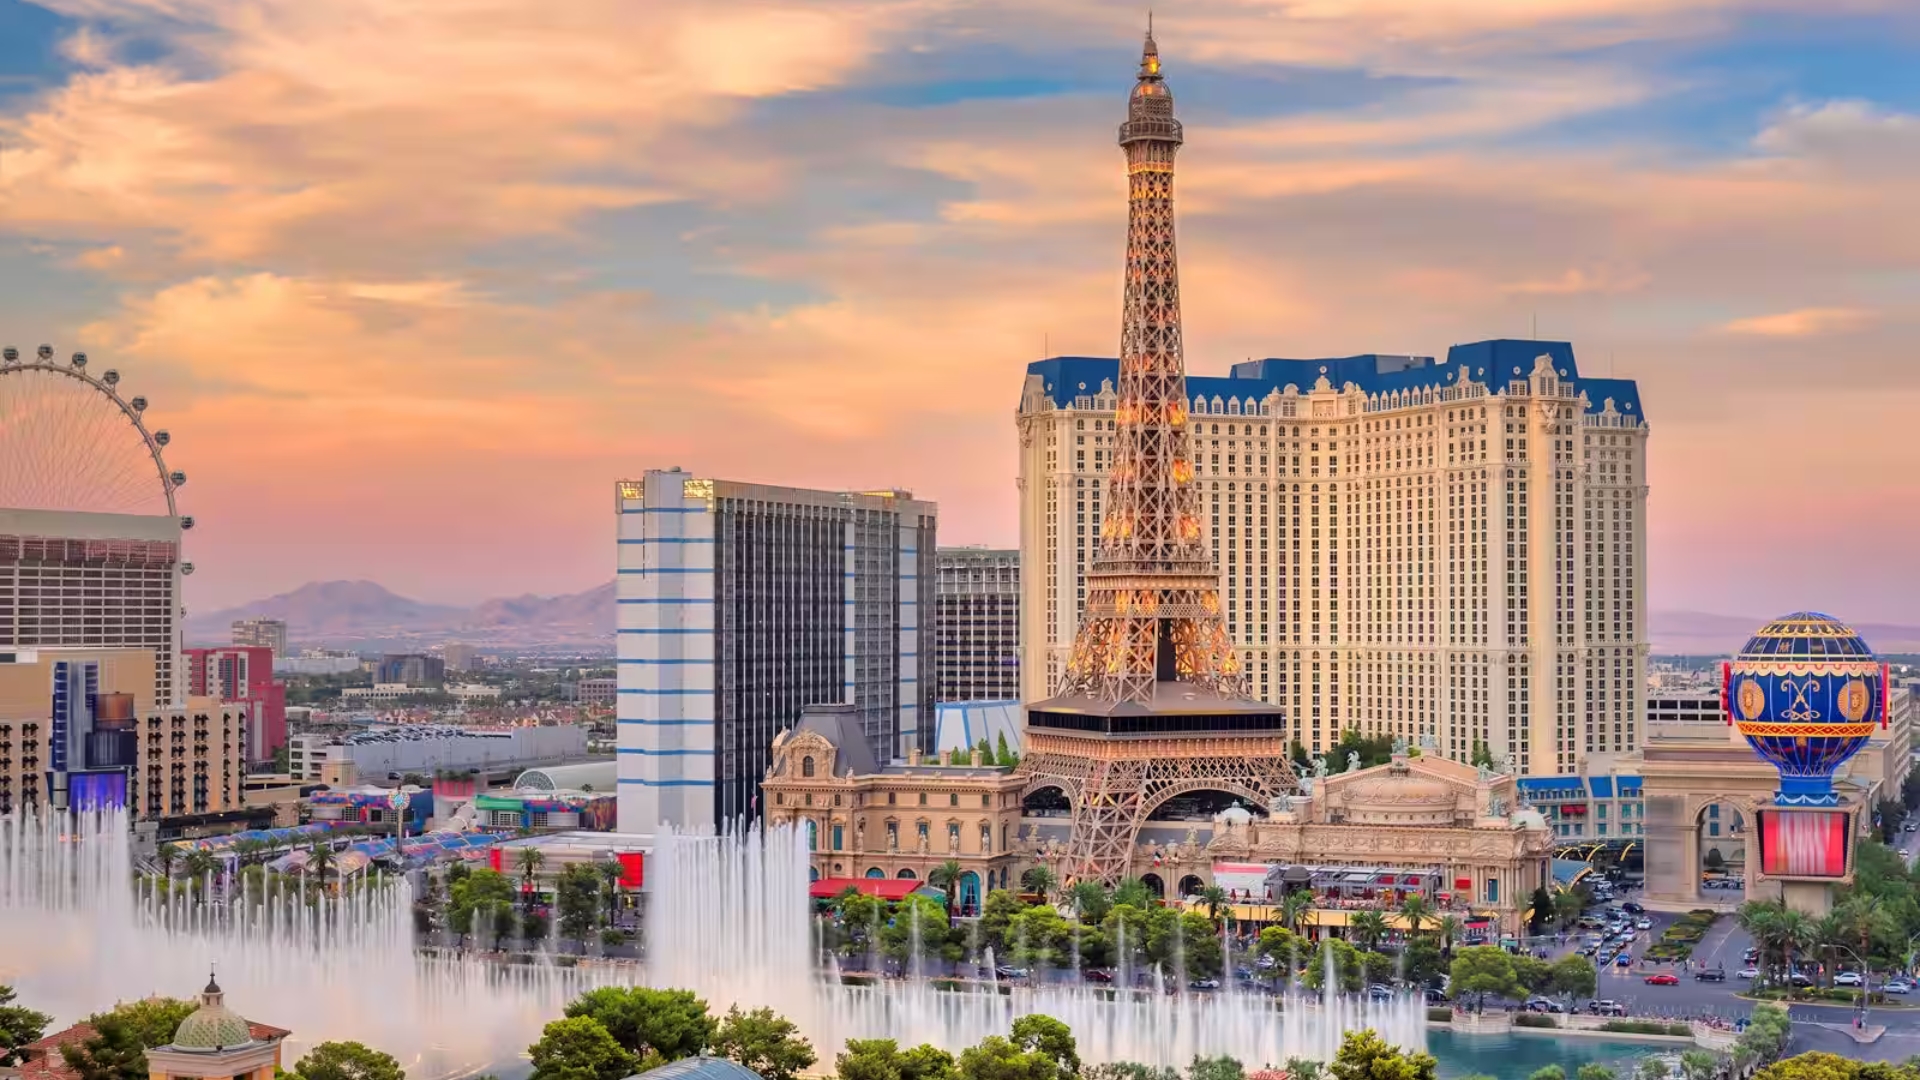 The Eiffel Tower view from our room - Picture of Paris Las Vegas